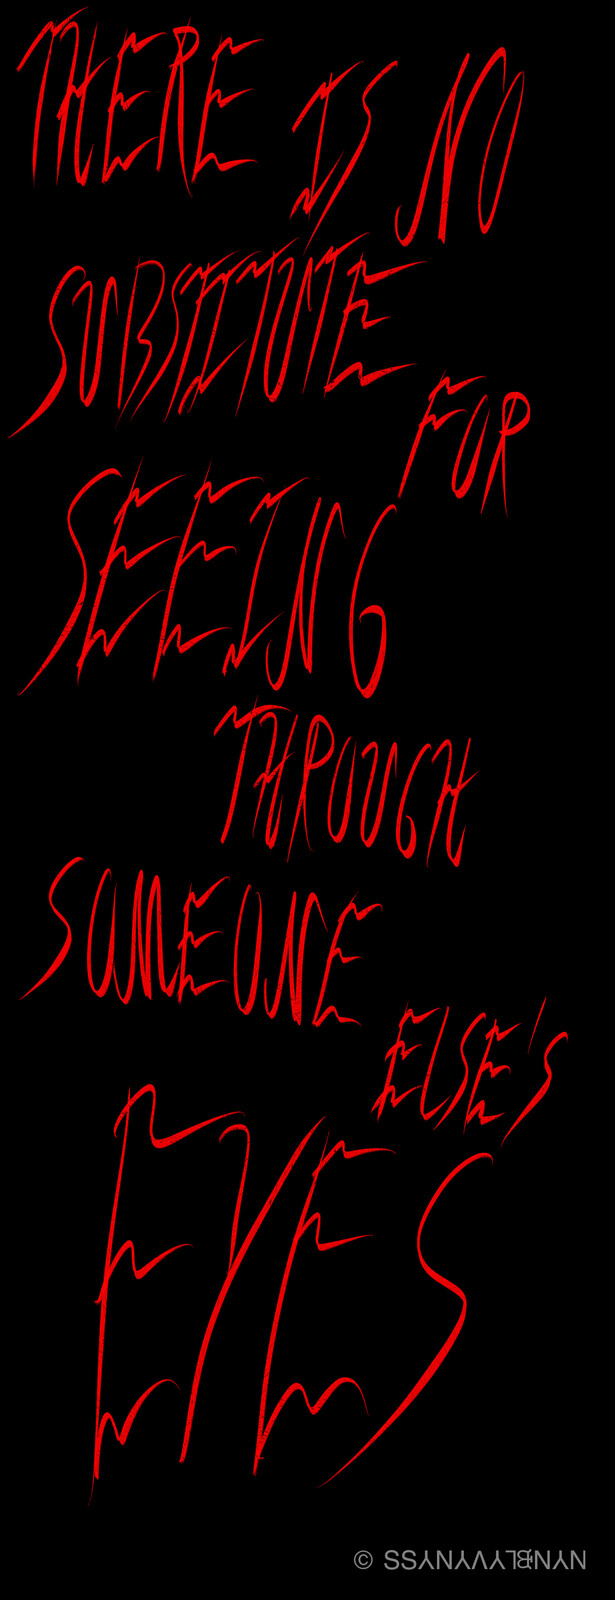 No Substitute for Seeing Through Someone’s Eyes